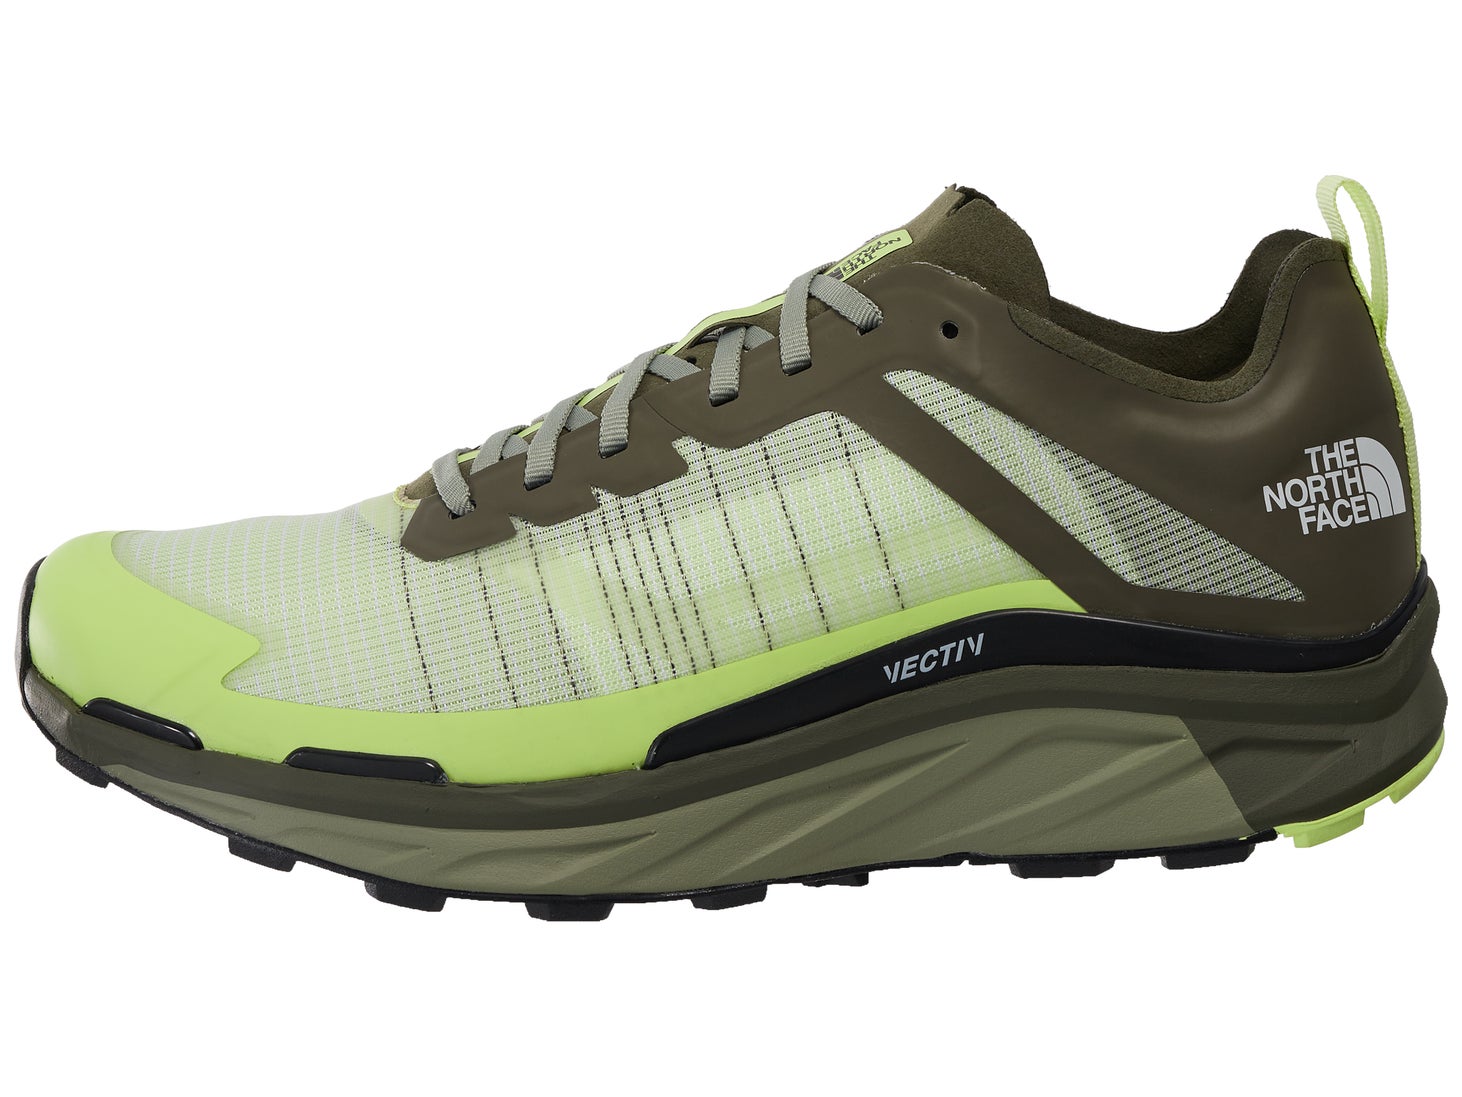 The North Face VECTIV Infinite Men's Shoes Green/Green | Running Warehouse